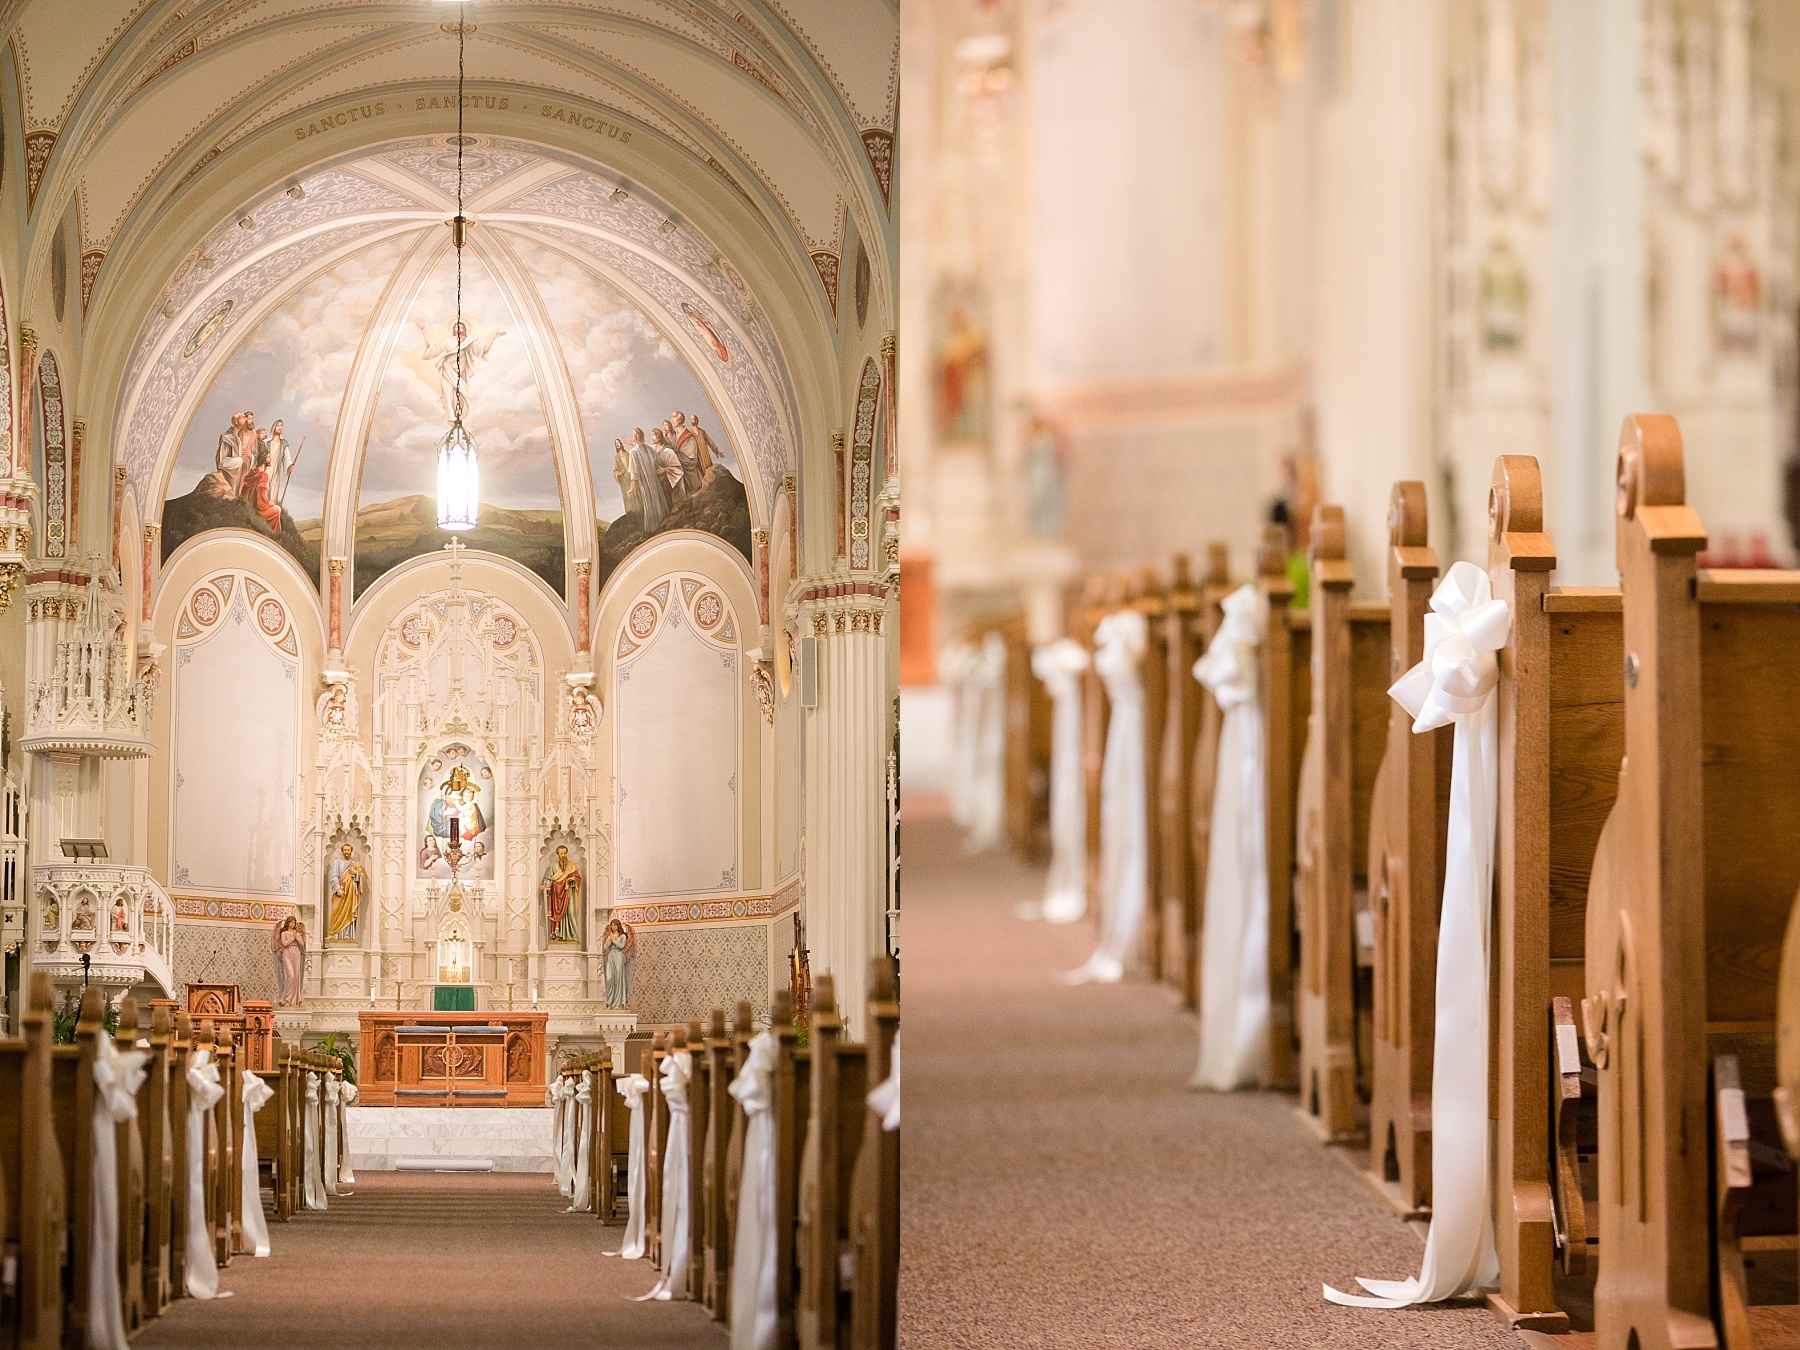 Heartfelt and classically chic, Sarah & Mack were married in the same Catholic church where his parents & grandparents had also been married.